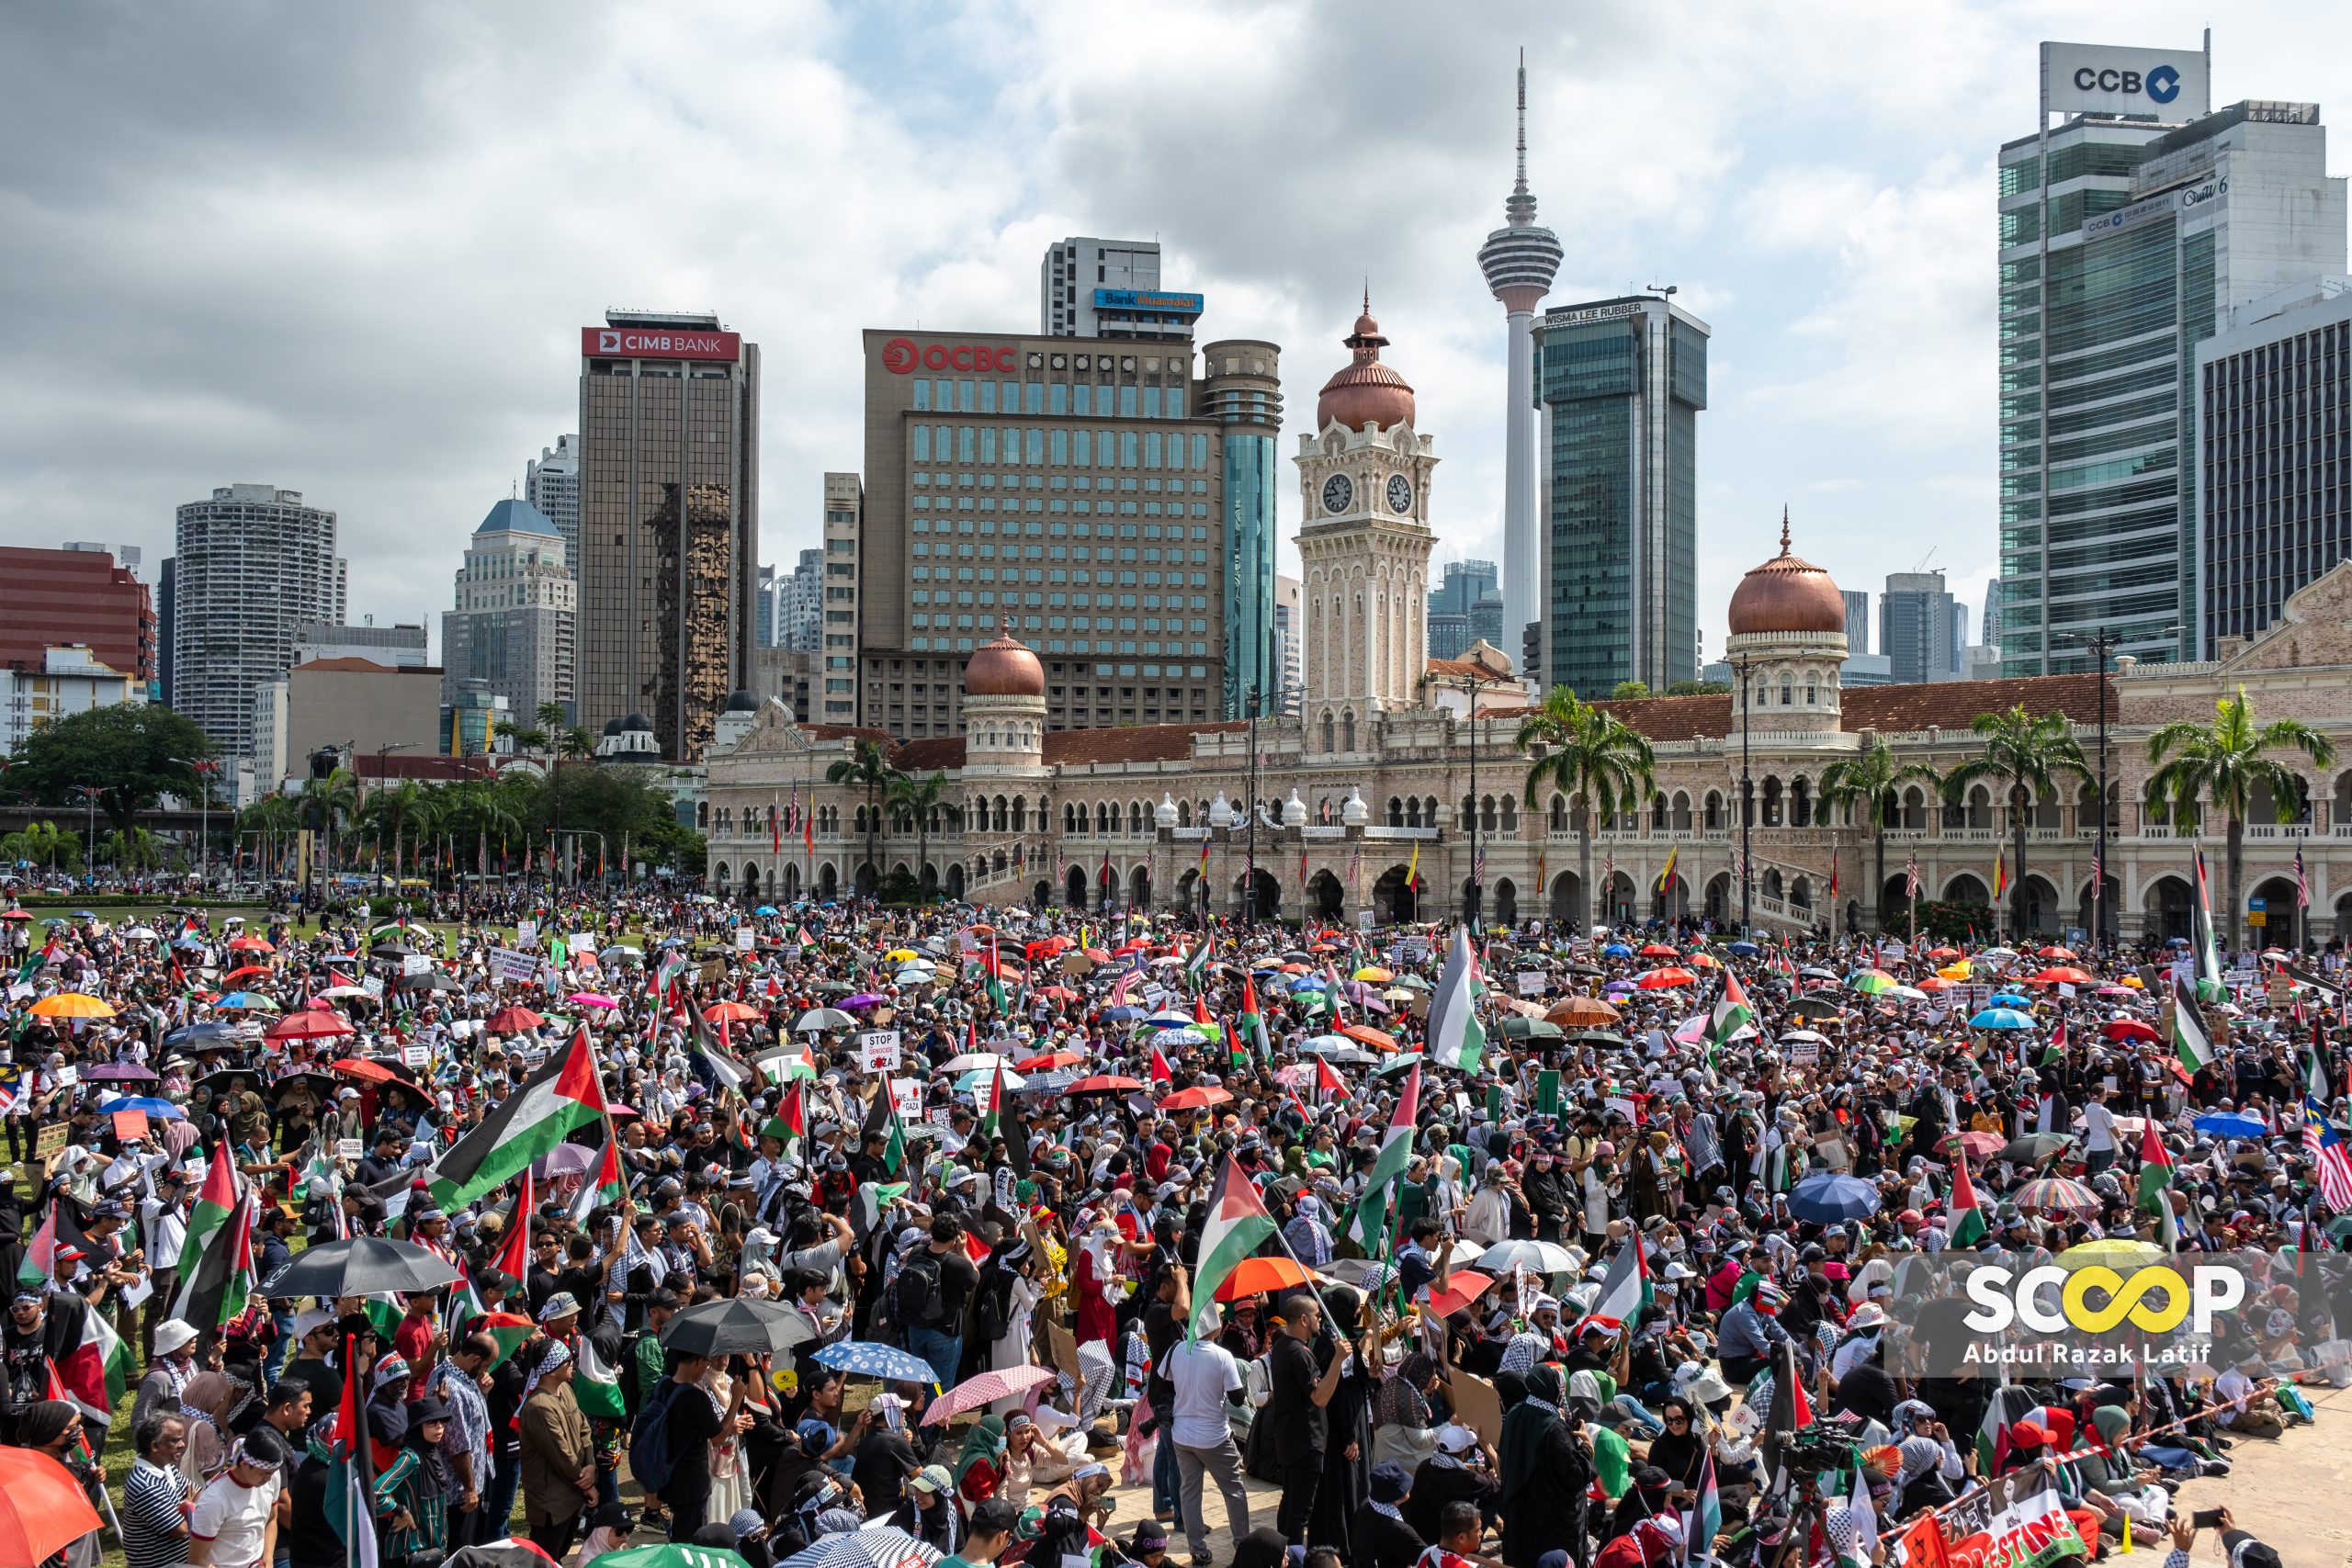 [LIVE] Gaza, don't you cry: Freedom for Palestine rally sees 10,000 participants